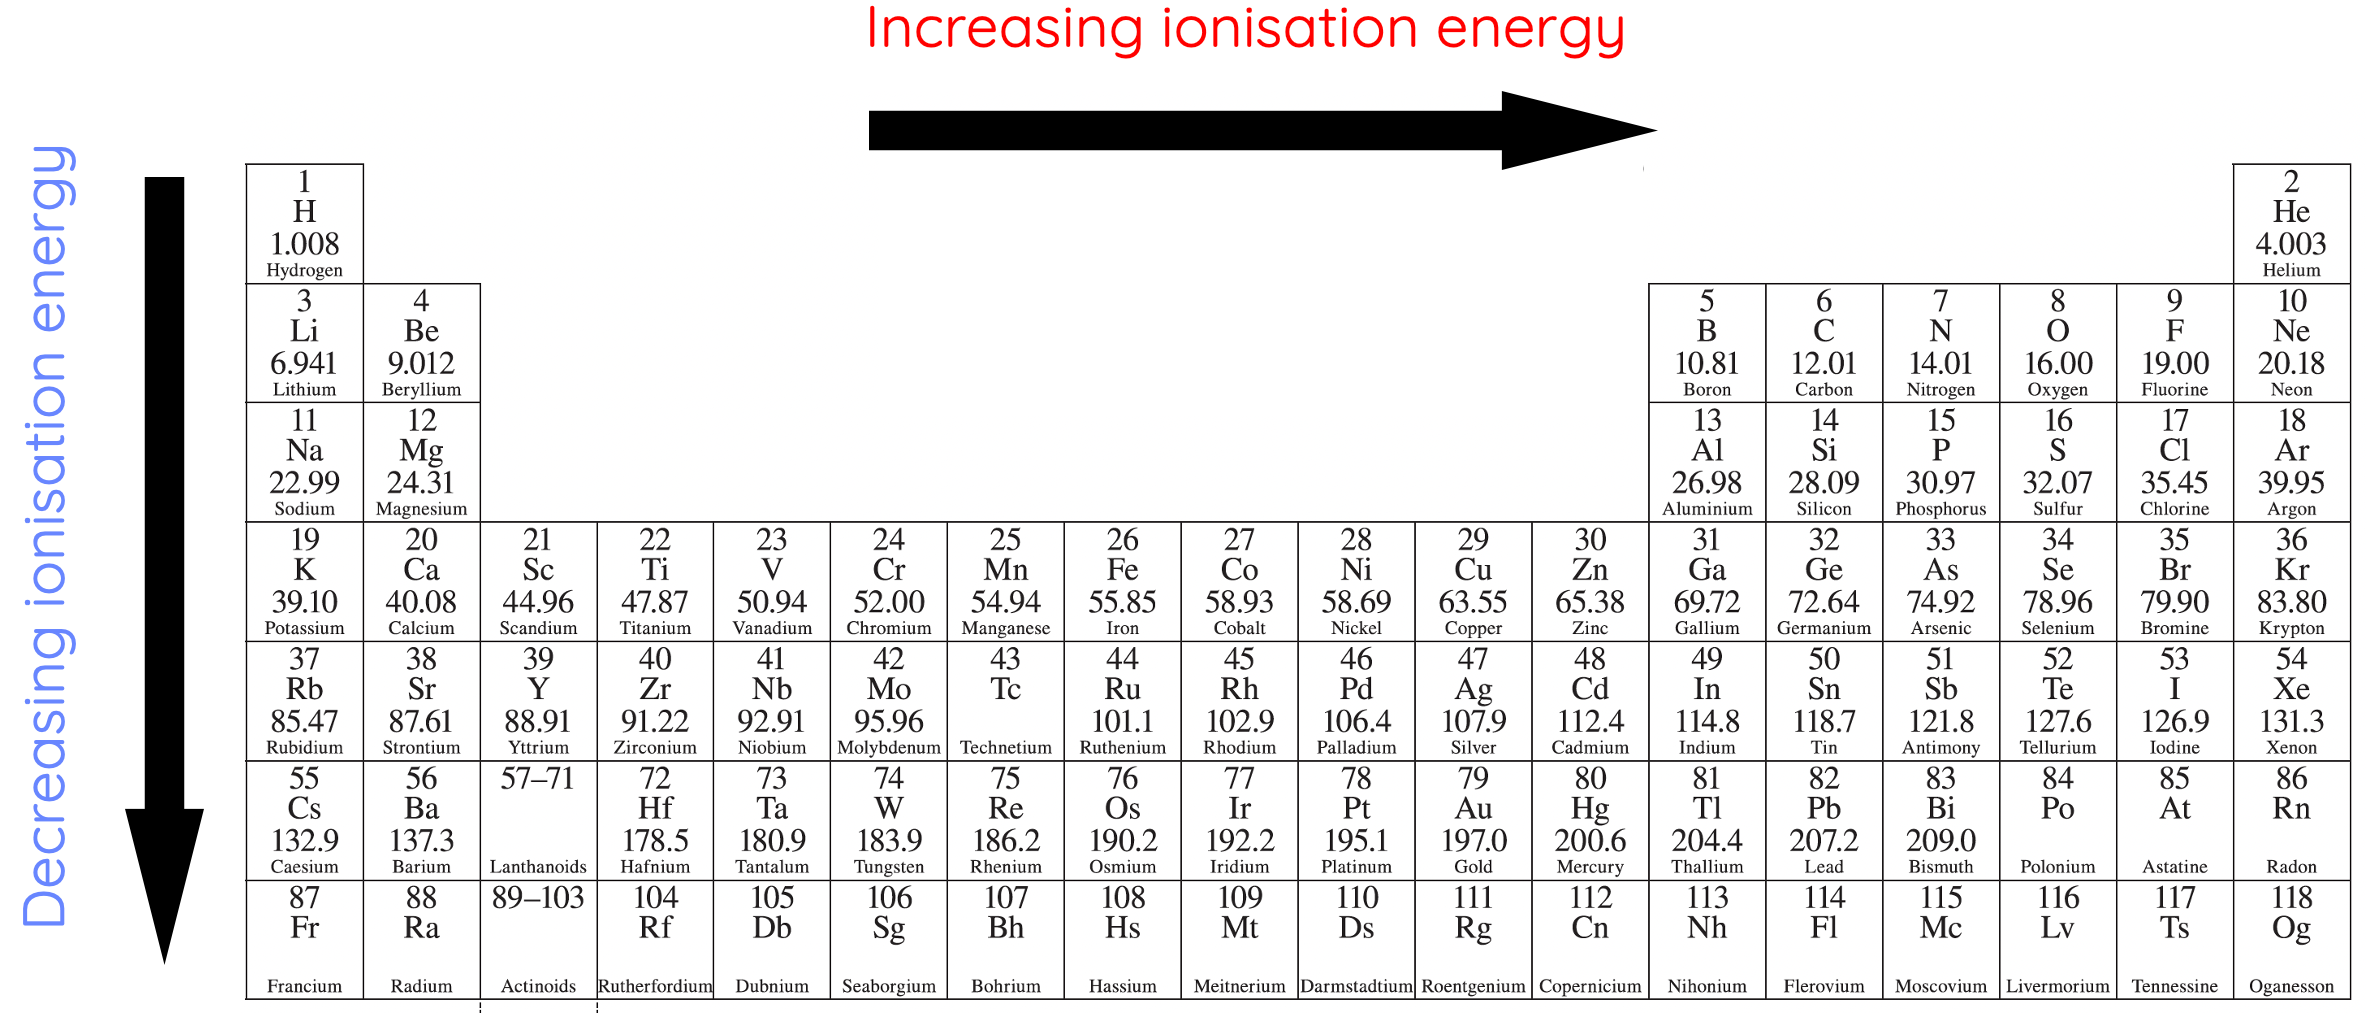 Ionisation energy trend in periodic table